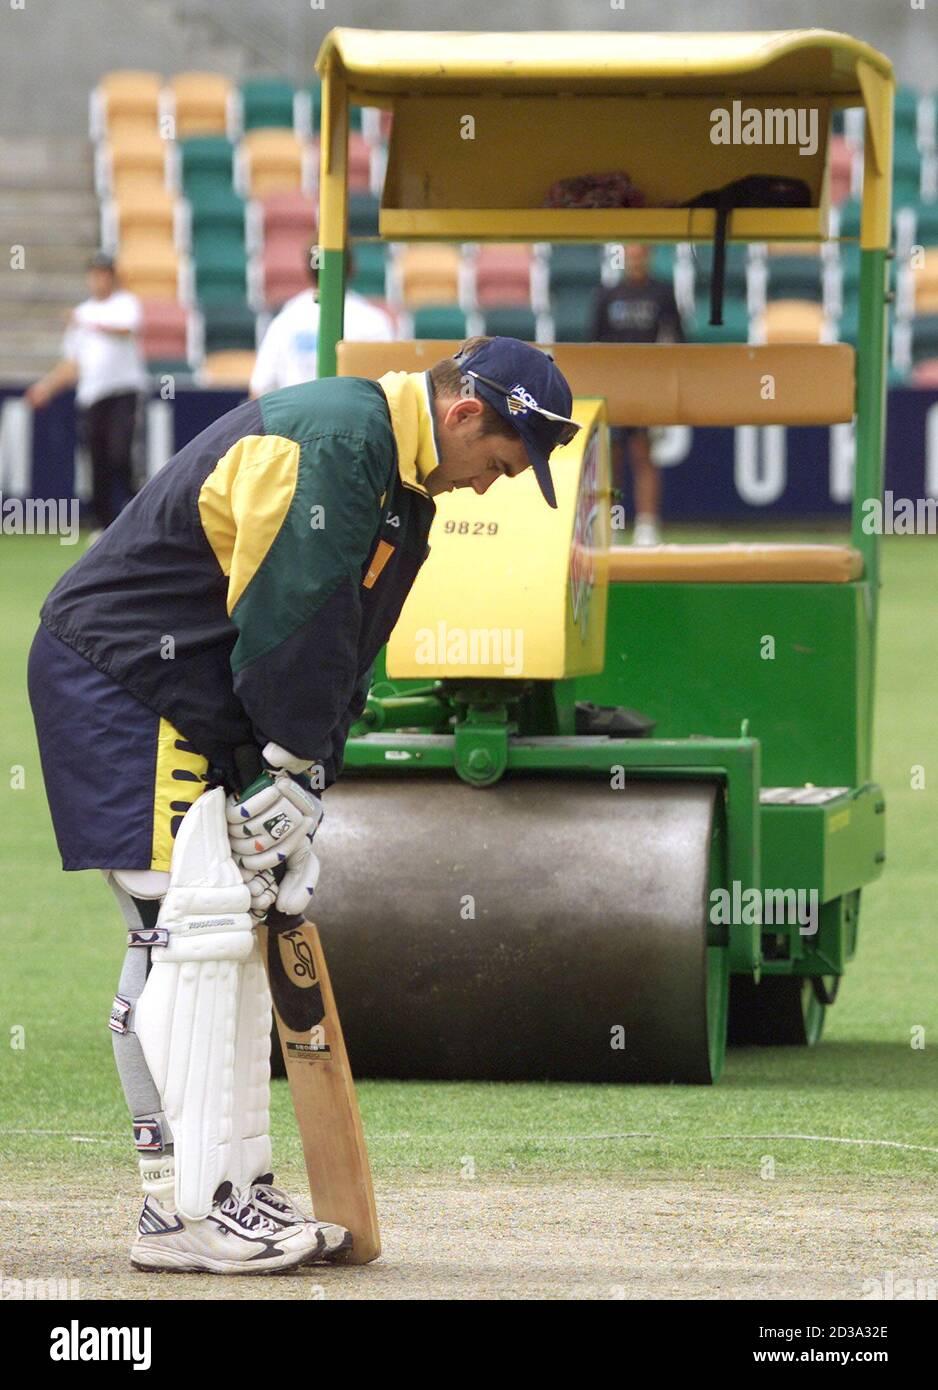 Australia's Justin Langer tests the Bellerive Oval wicket in Hobart as the ground's roller lies idle in the background November 21, 2001. New Zealand play Australia in the second cricket test starting Thursday. The first test ended in a draw. REUTERS/Will Burgess  WB/JD Stock Photo